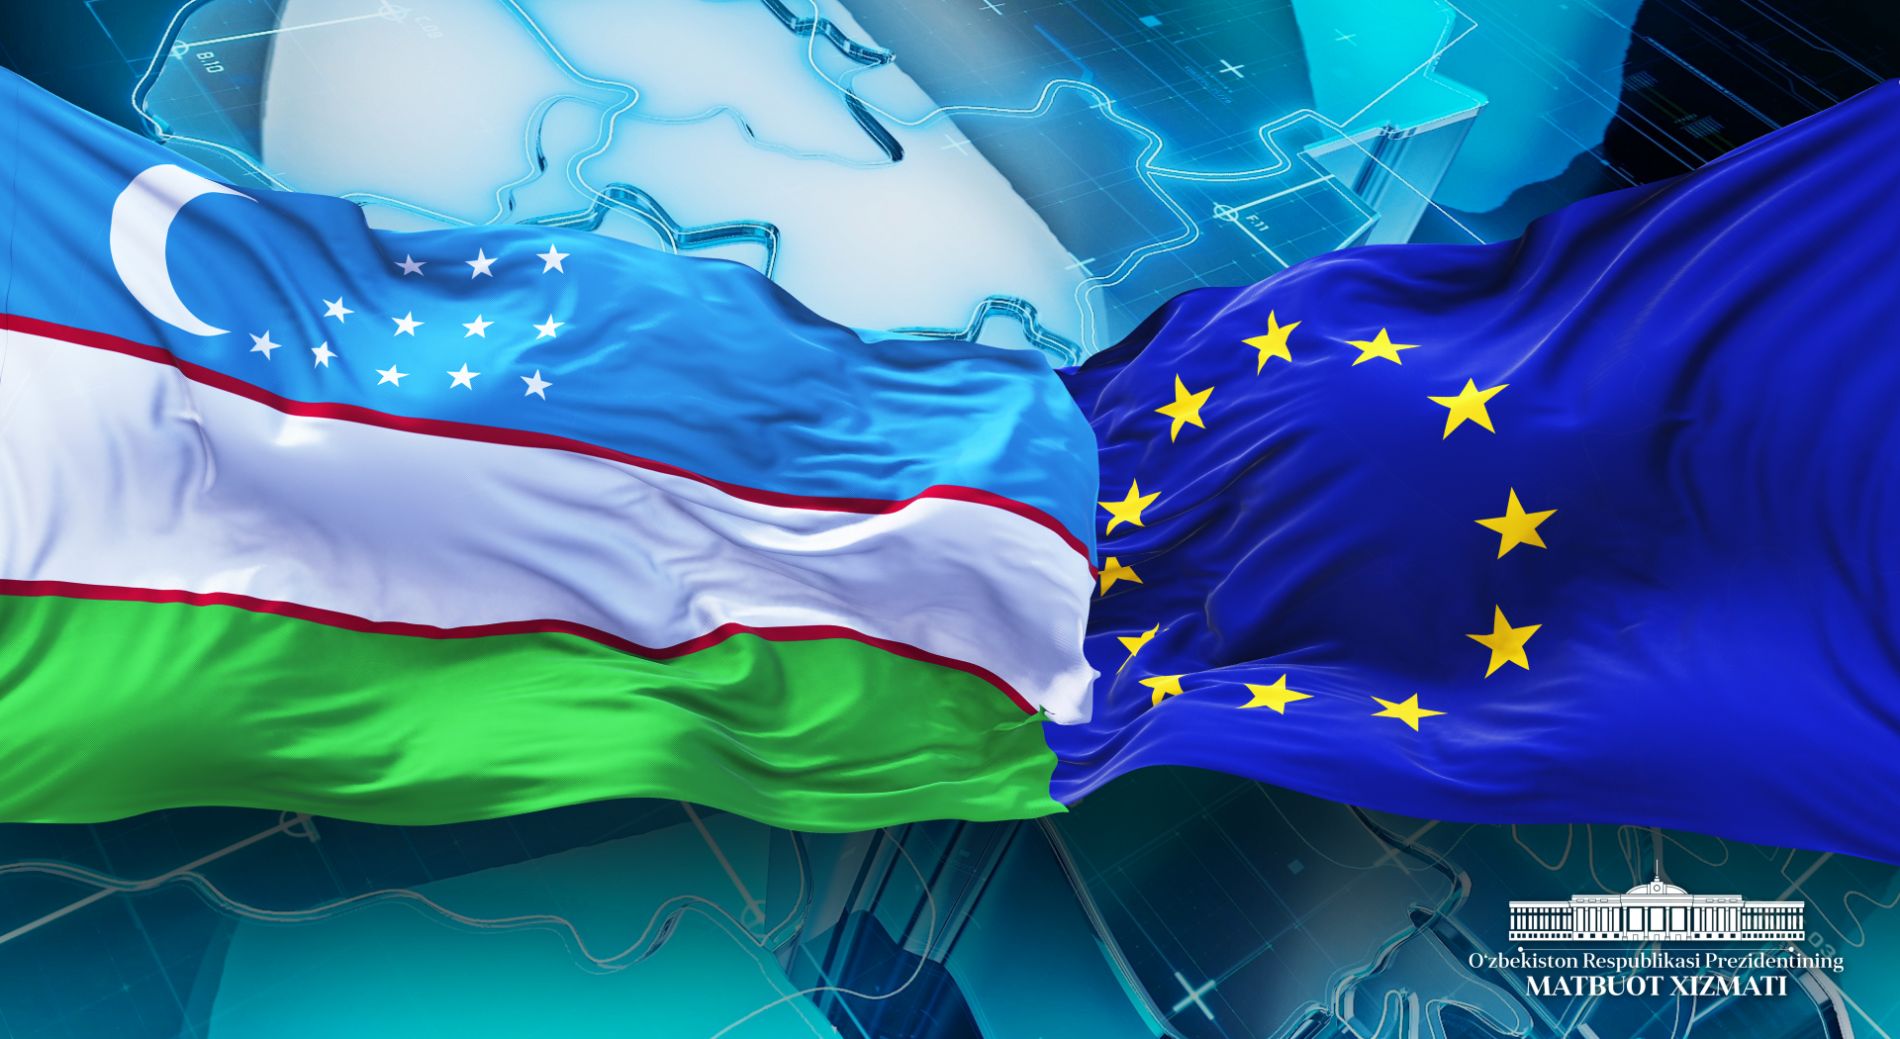 The European Investment Bank and the European Bank for Reconstruction and Development engage in projects to promote Uzbekistan's economic development